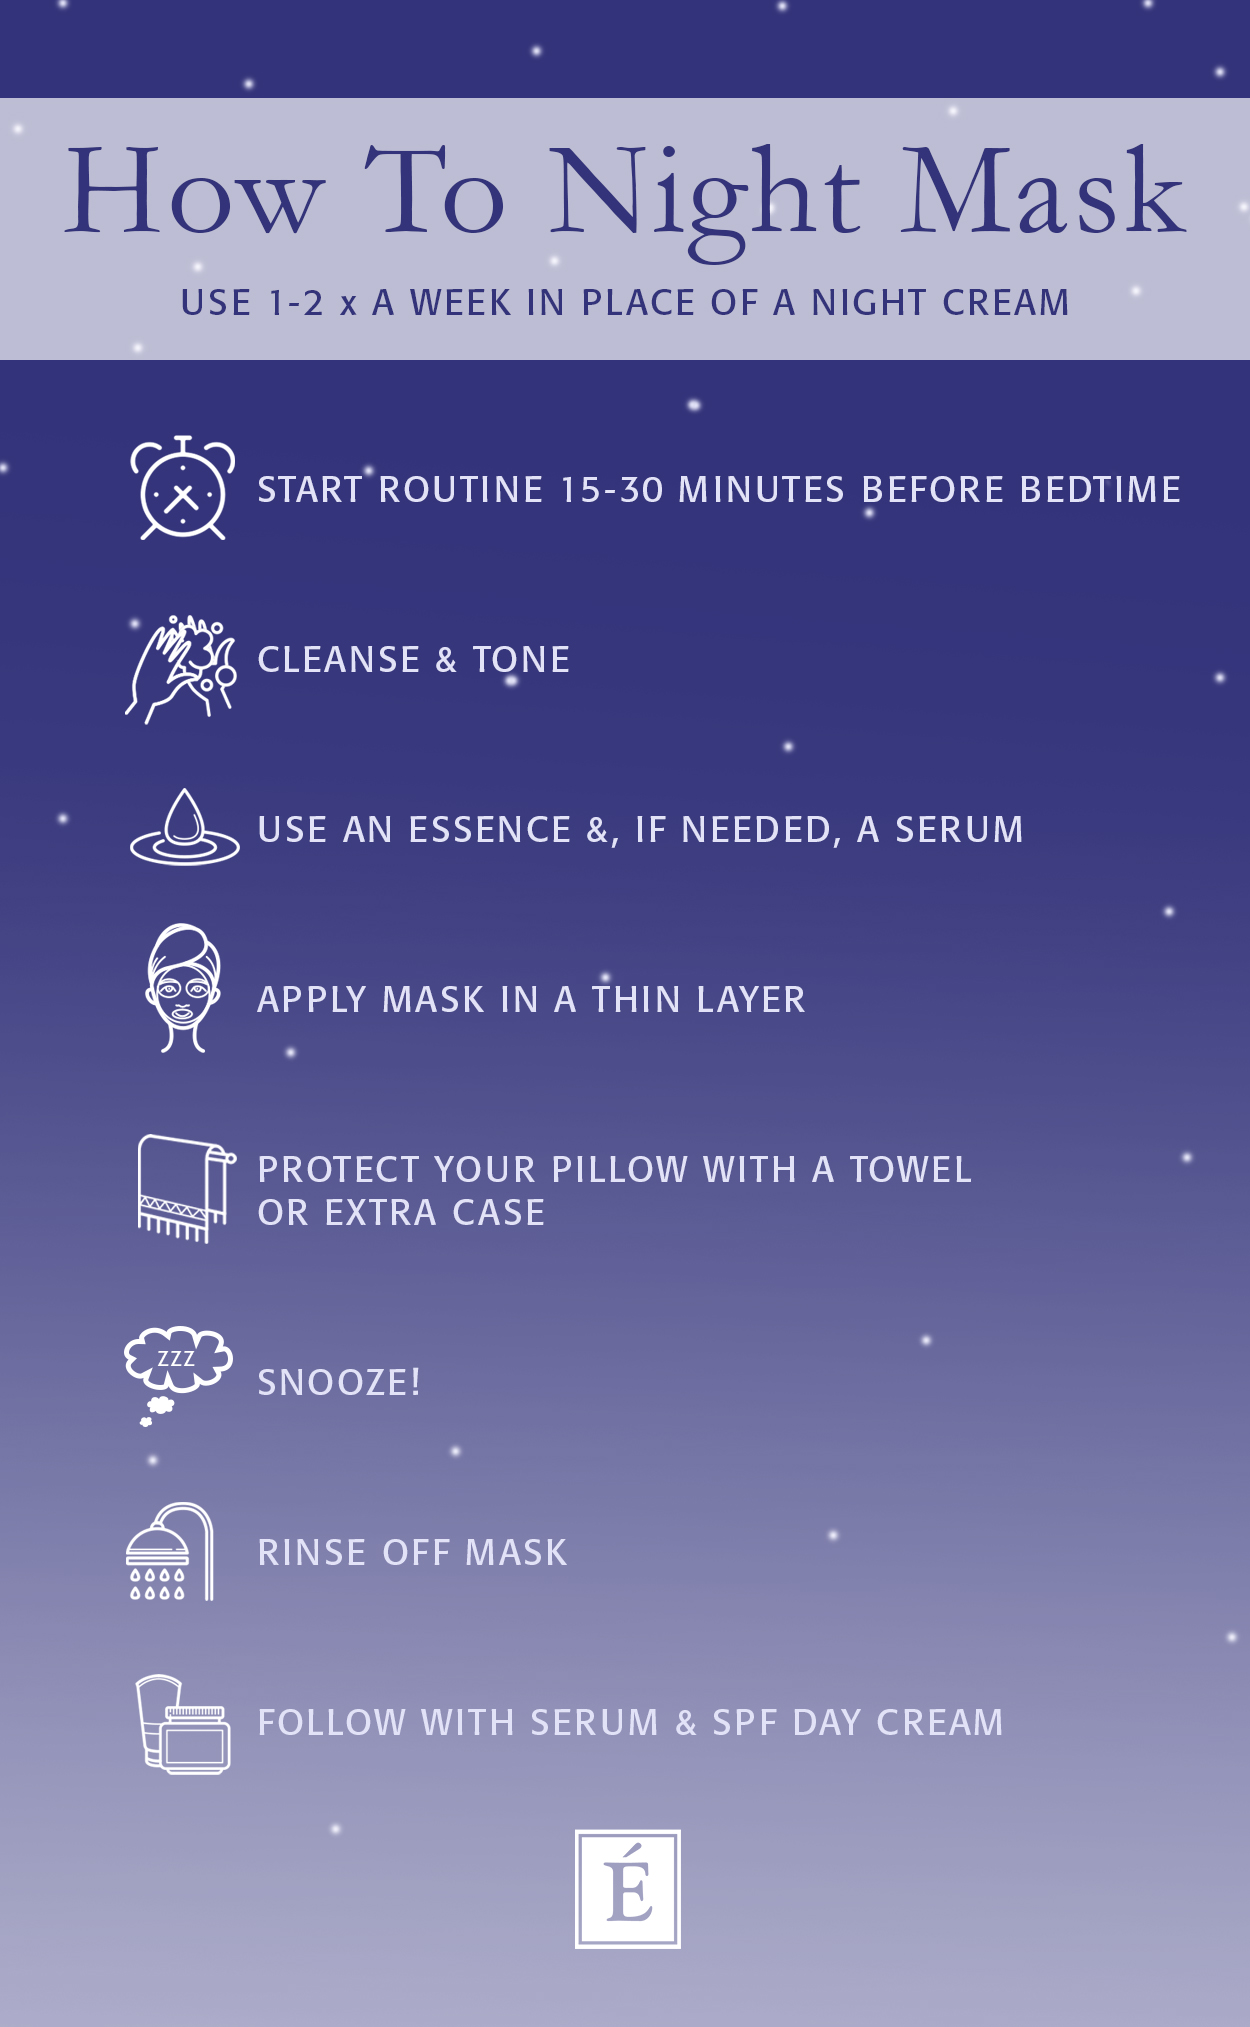 How To Night Mask infographic